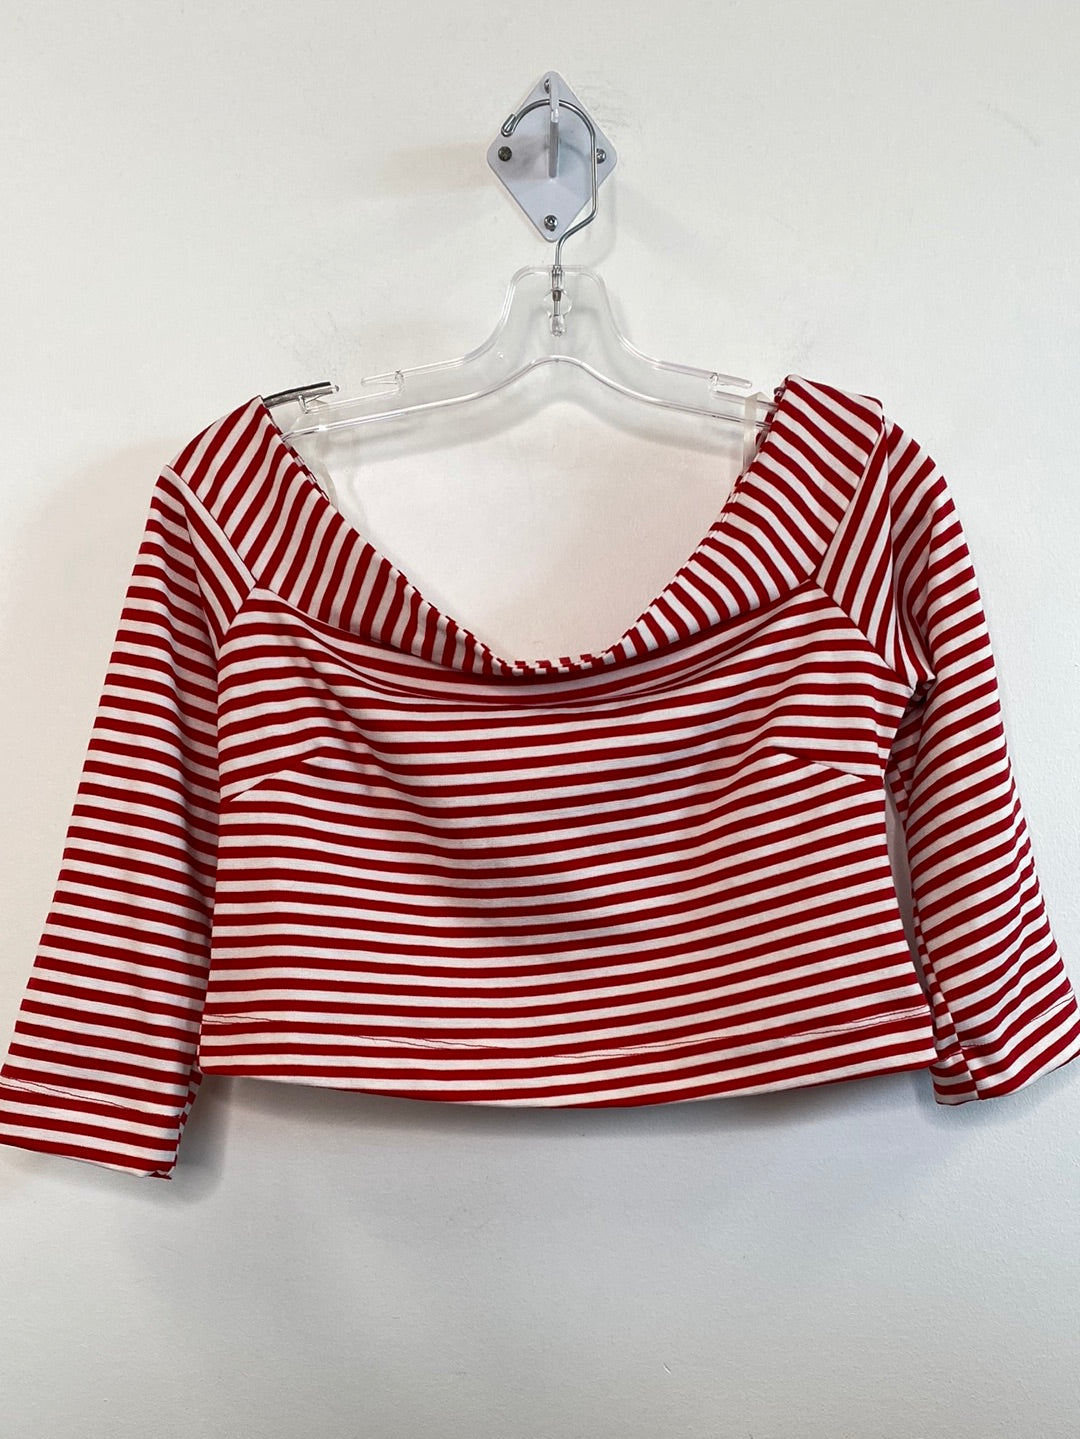 Bettie Page Striped Cropped Top (12)